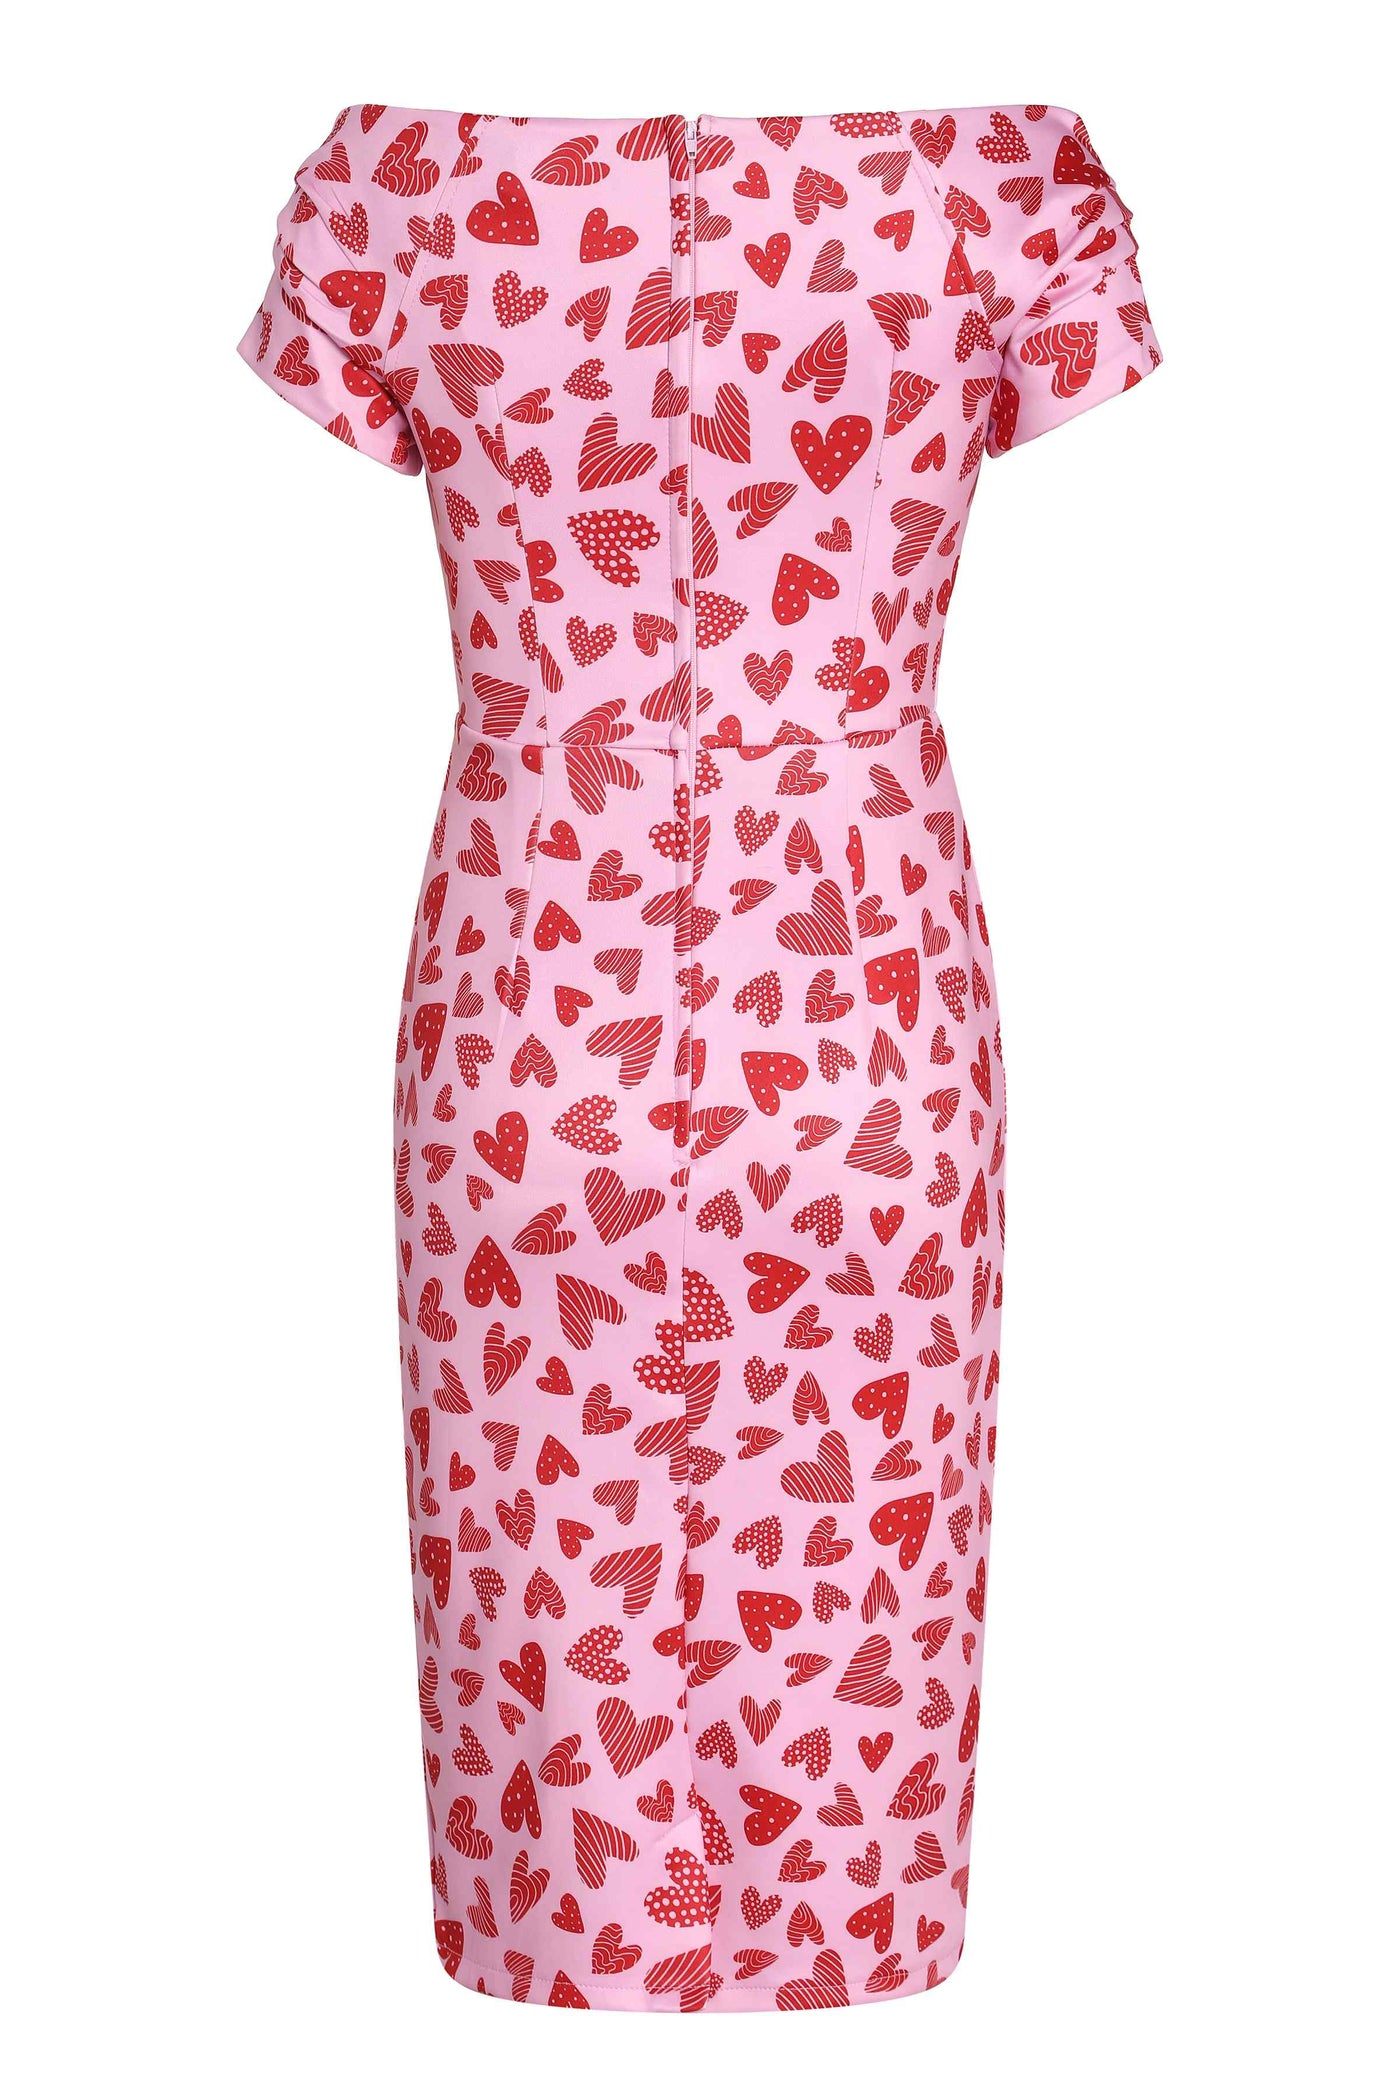 Back View of Heart Print Off Shoulder Pencil Dress in Pink